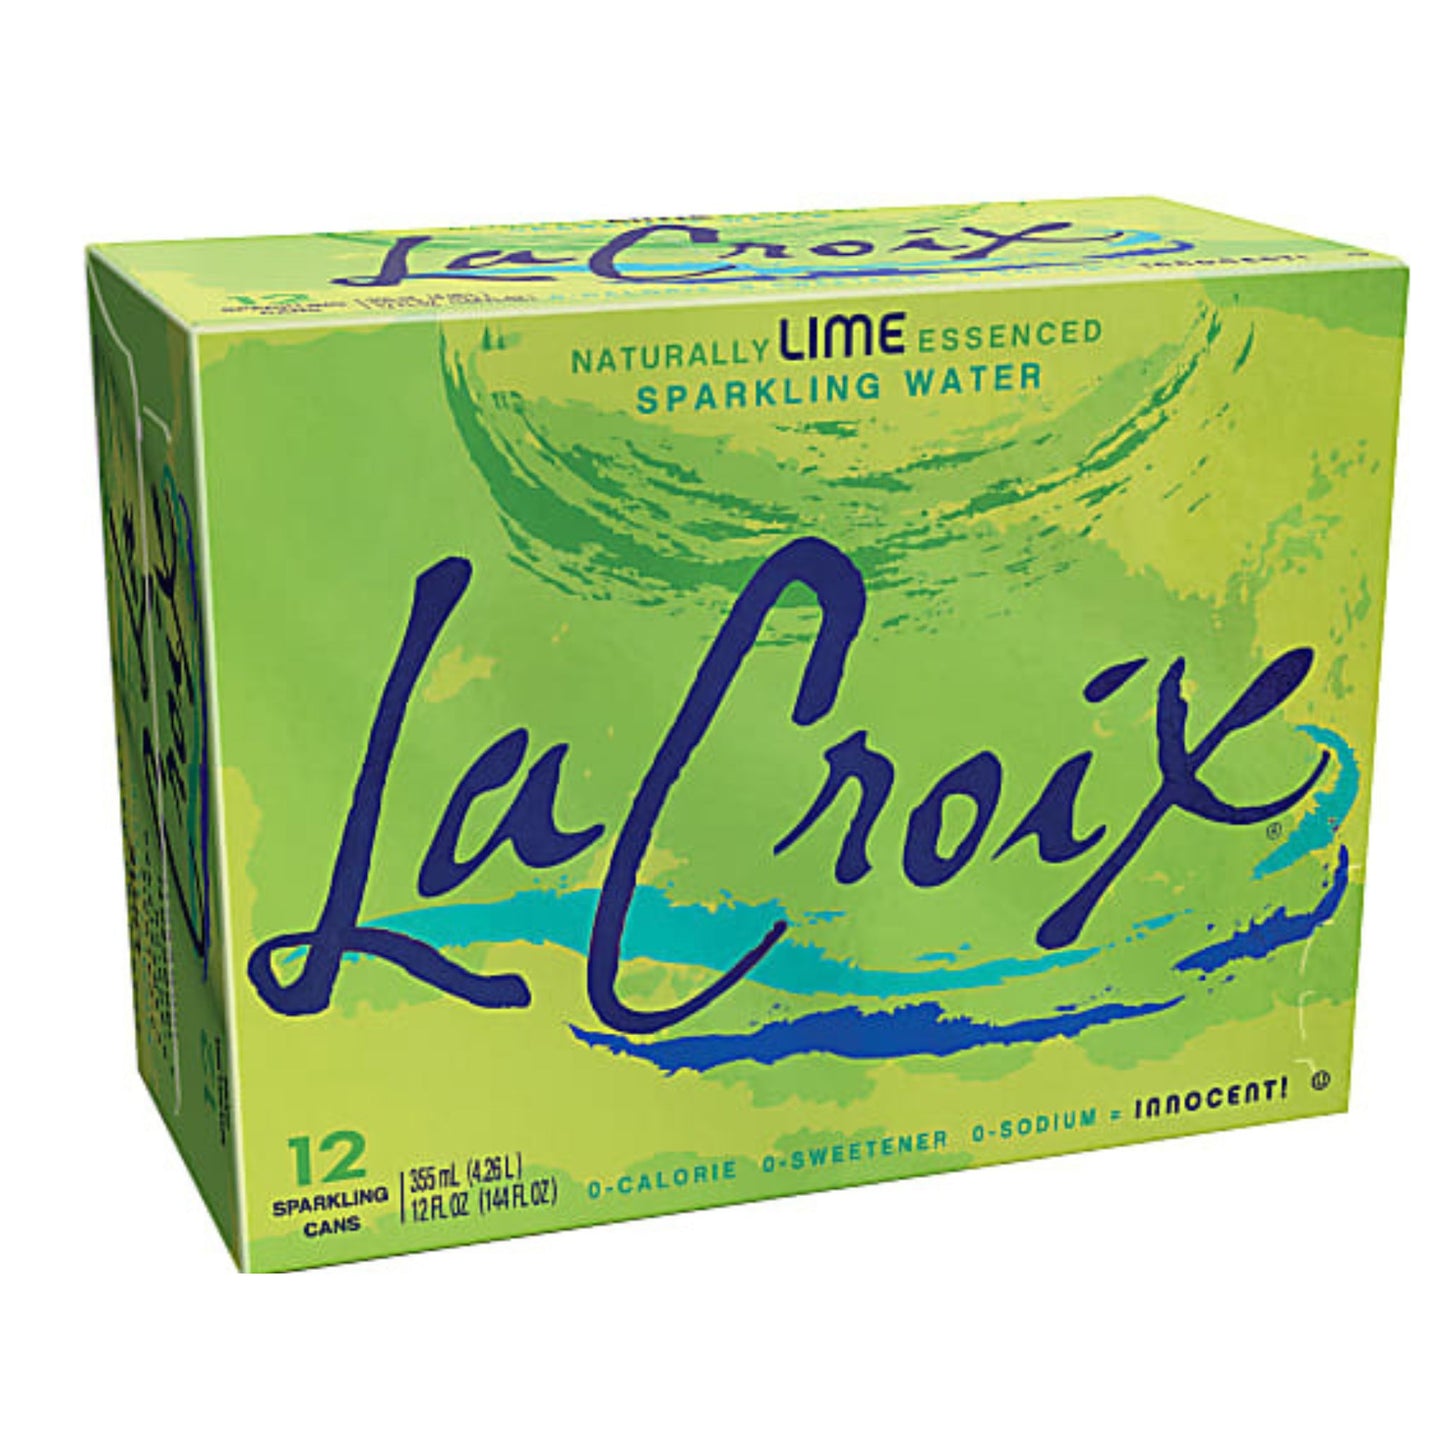 LaCroix Core Sparkling Water with Natural Lime Flavor 12 Oz. Case of 12 Cans